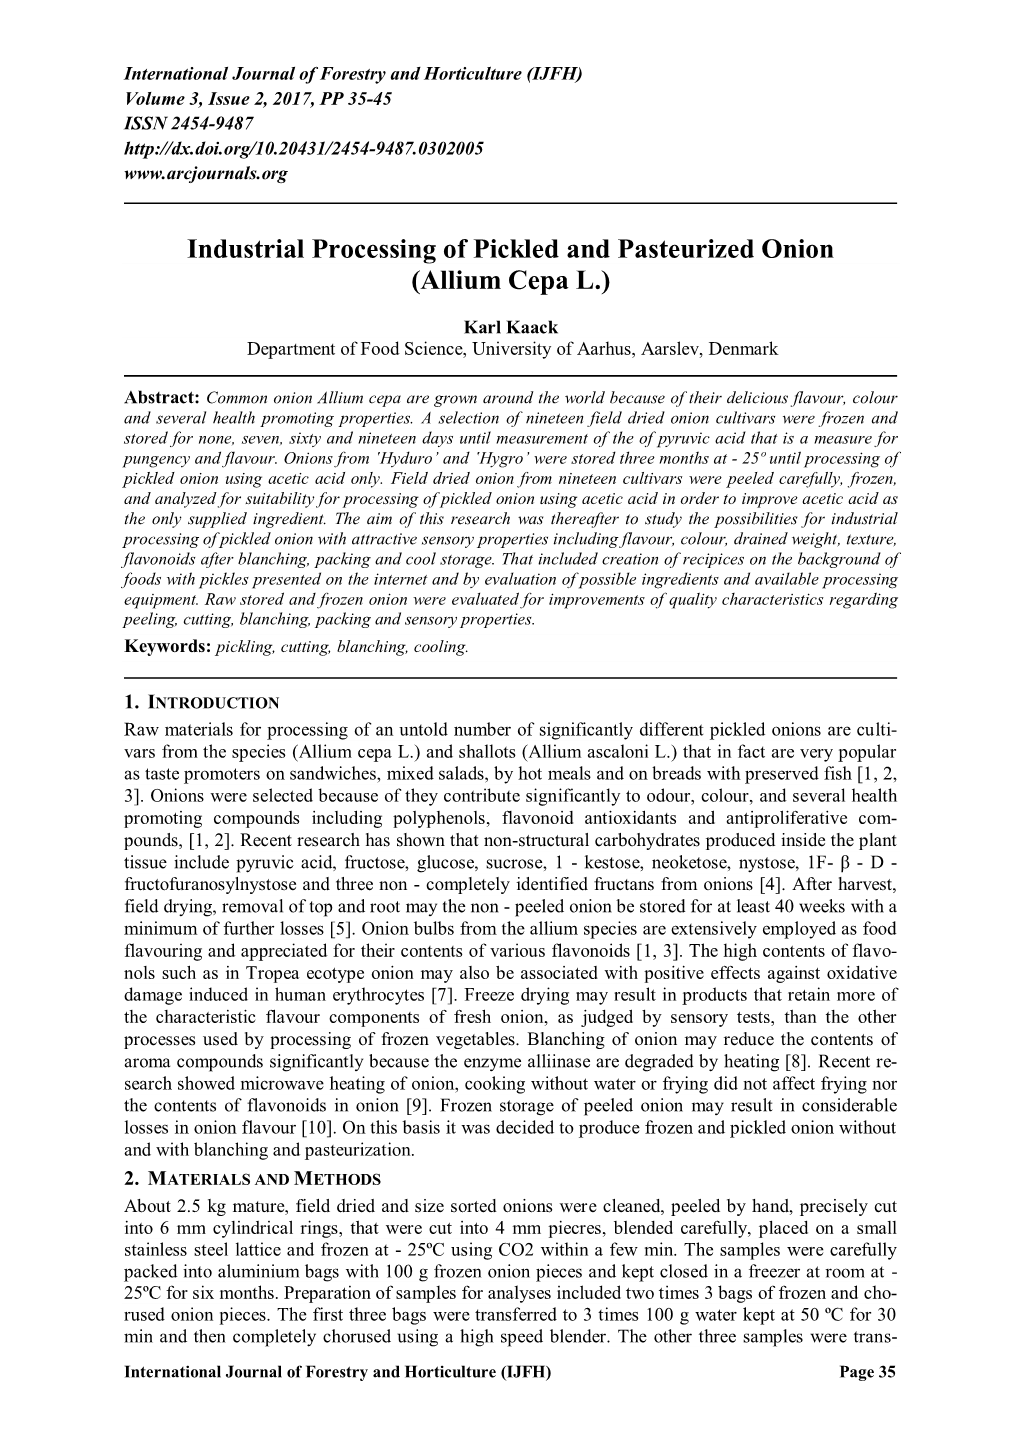 Industrial Processing of Pickled and Pasteurized Onion (Allium Cepa L.)